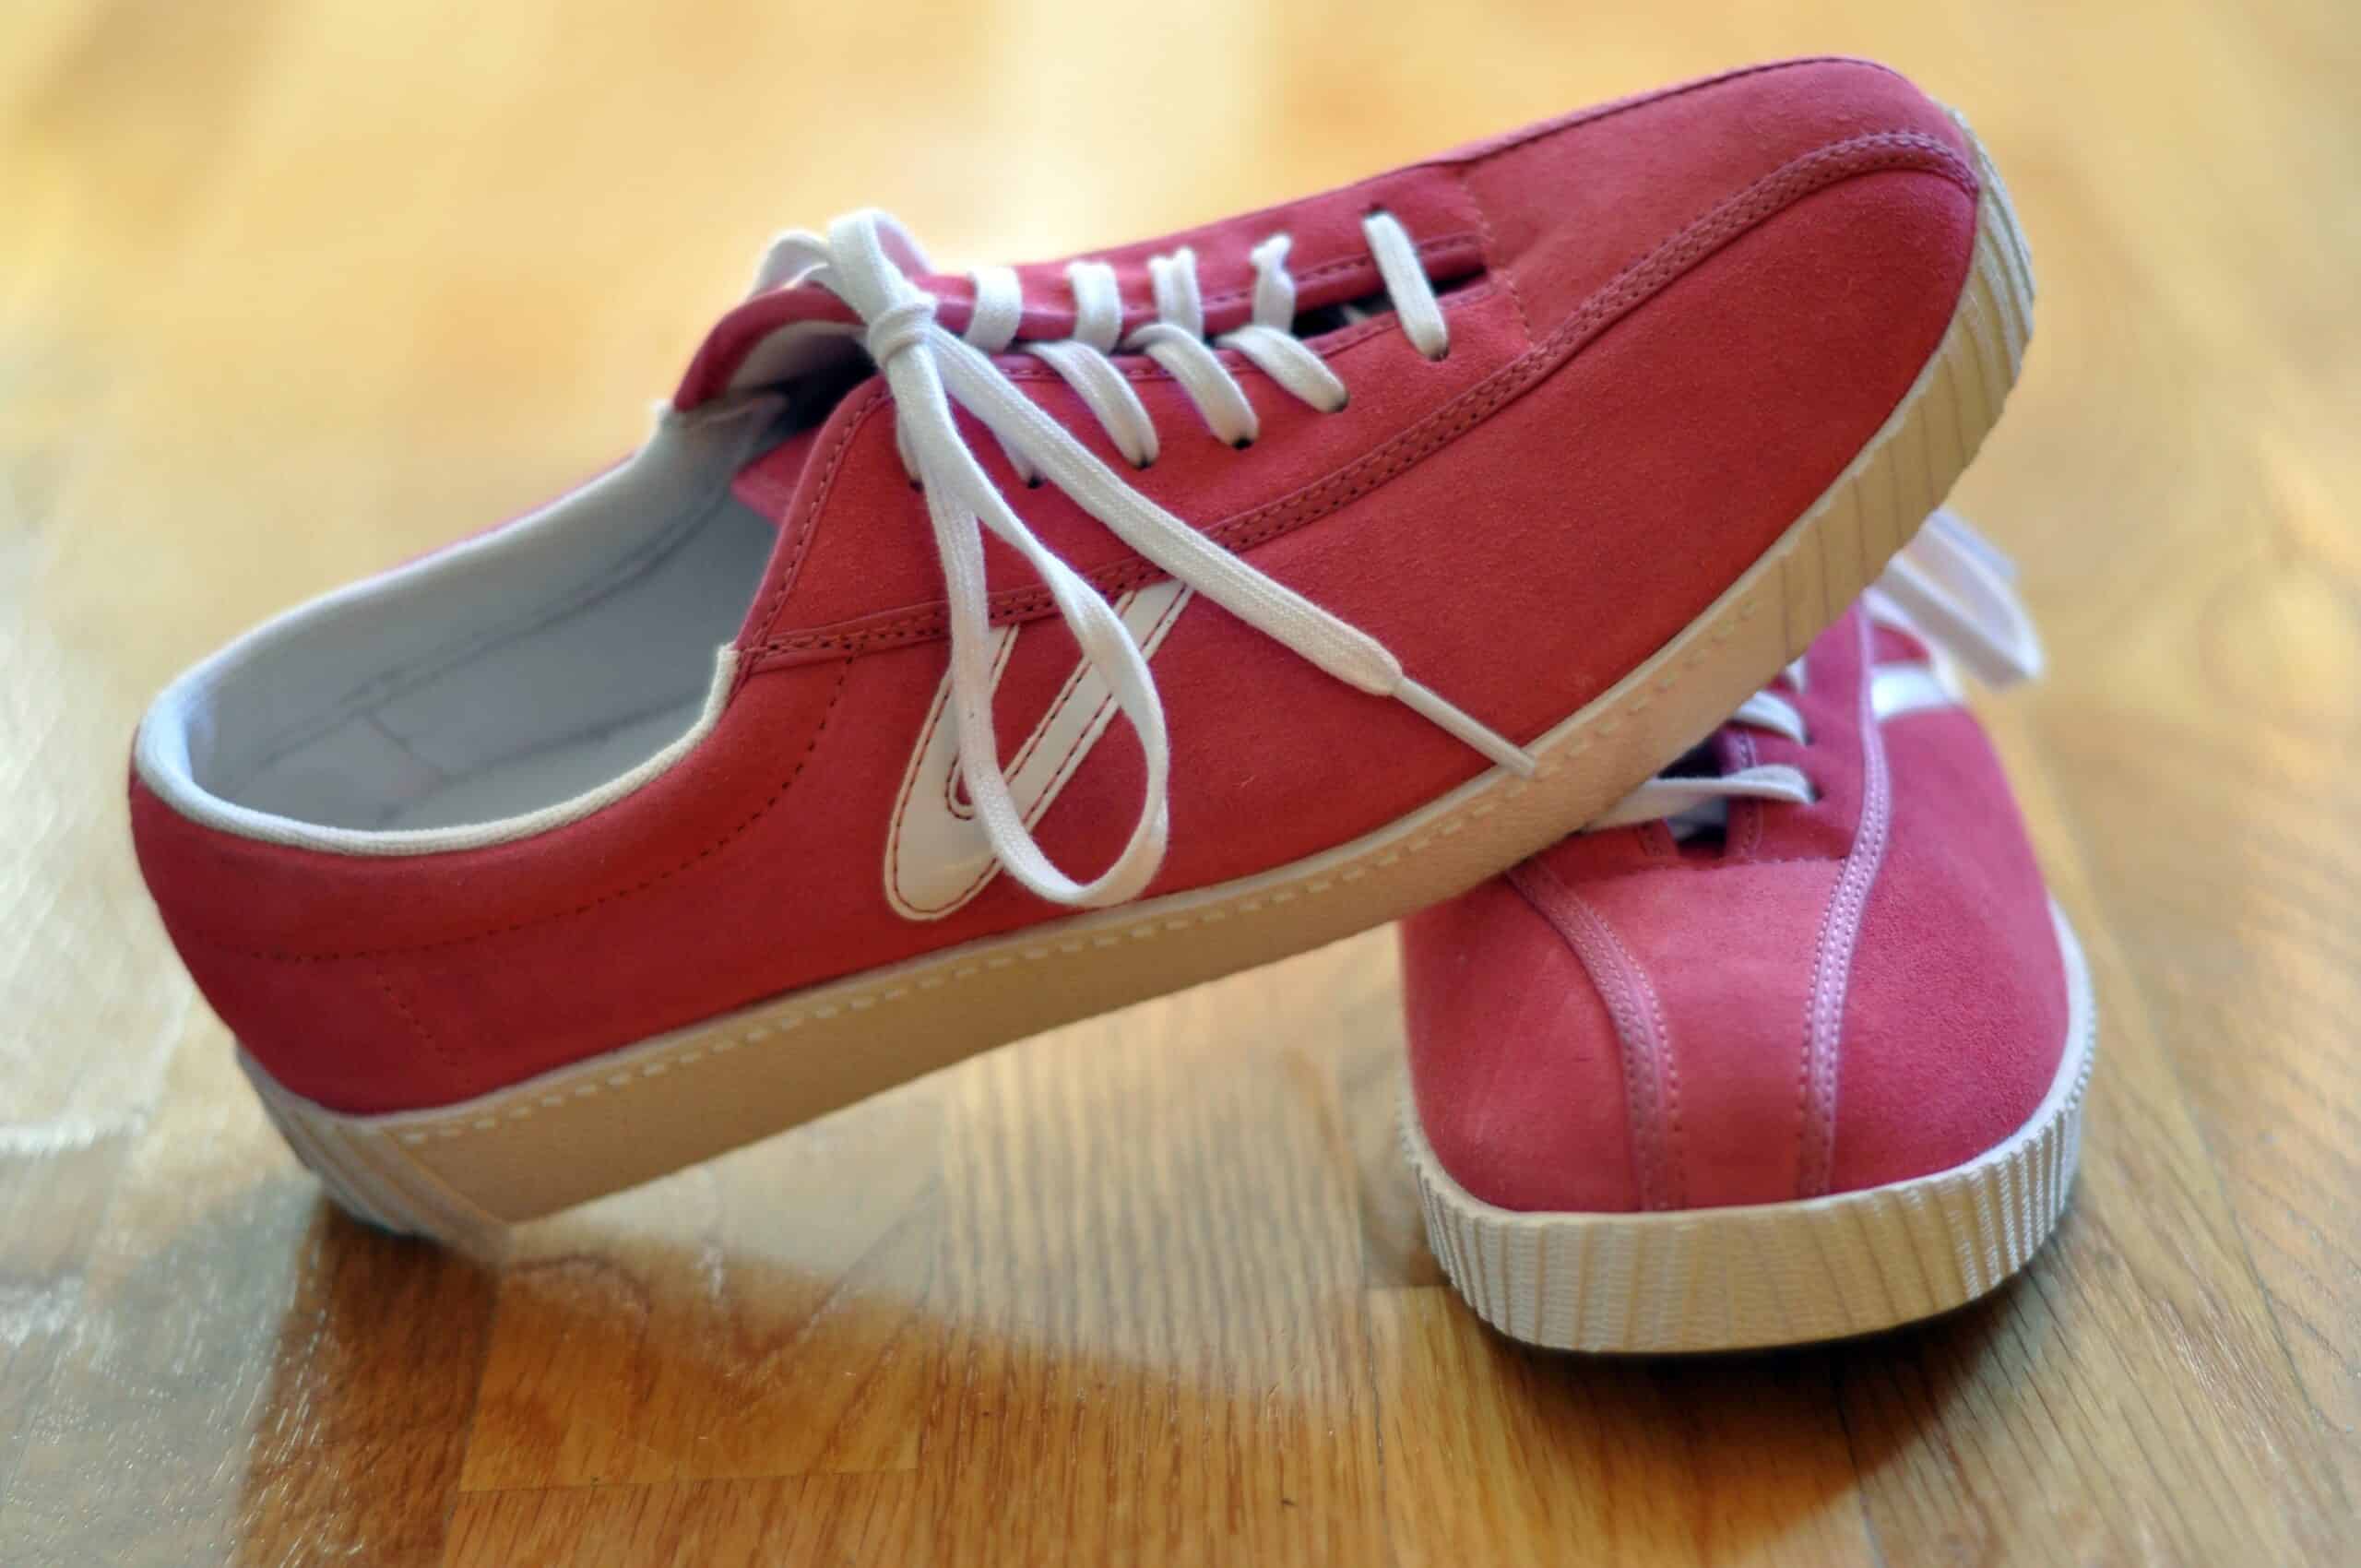 Pink suede Tretorn tennis shoes